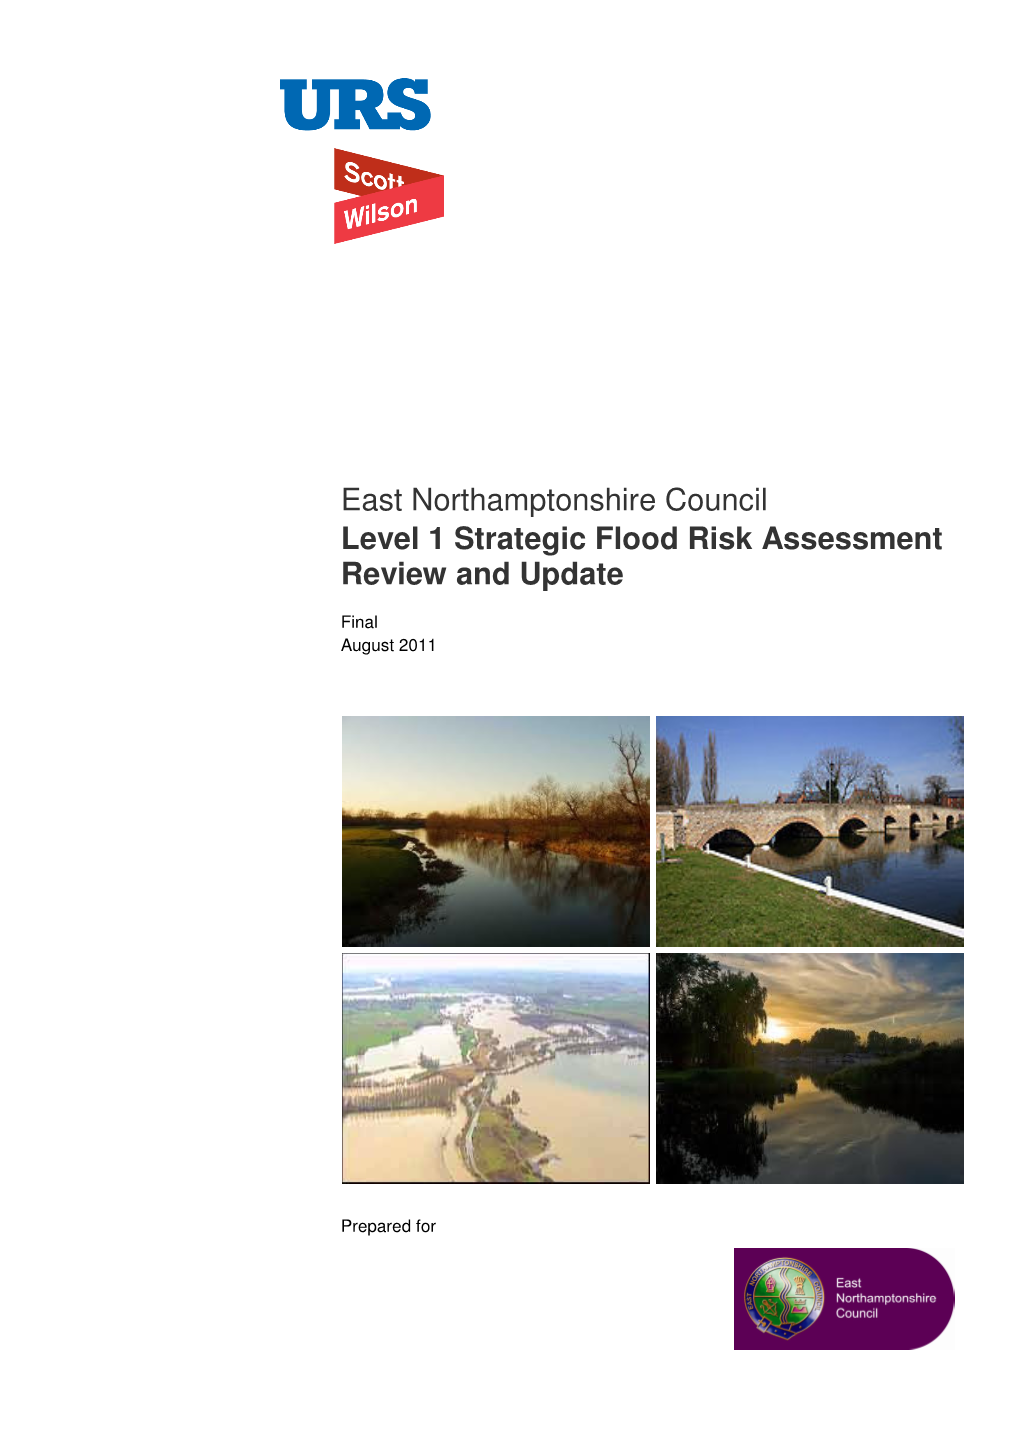 East Northamptonshire Council Level 1 Strategic Flood Risk Assessment Review and Update